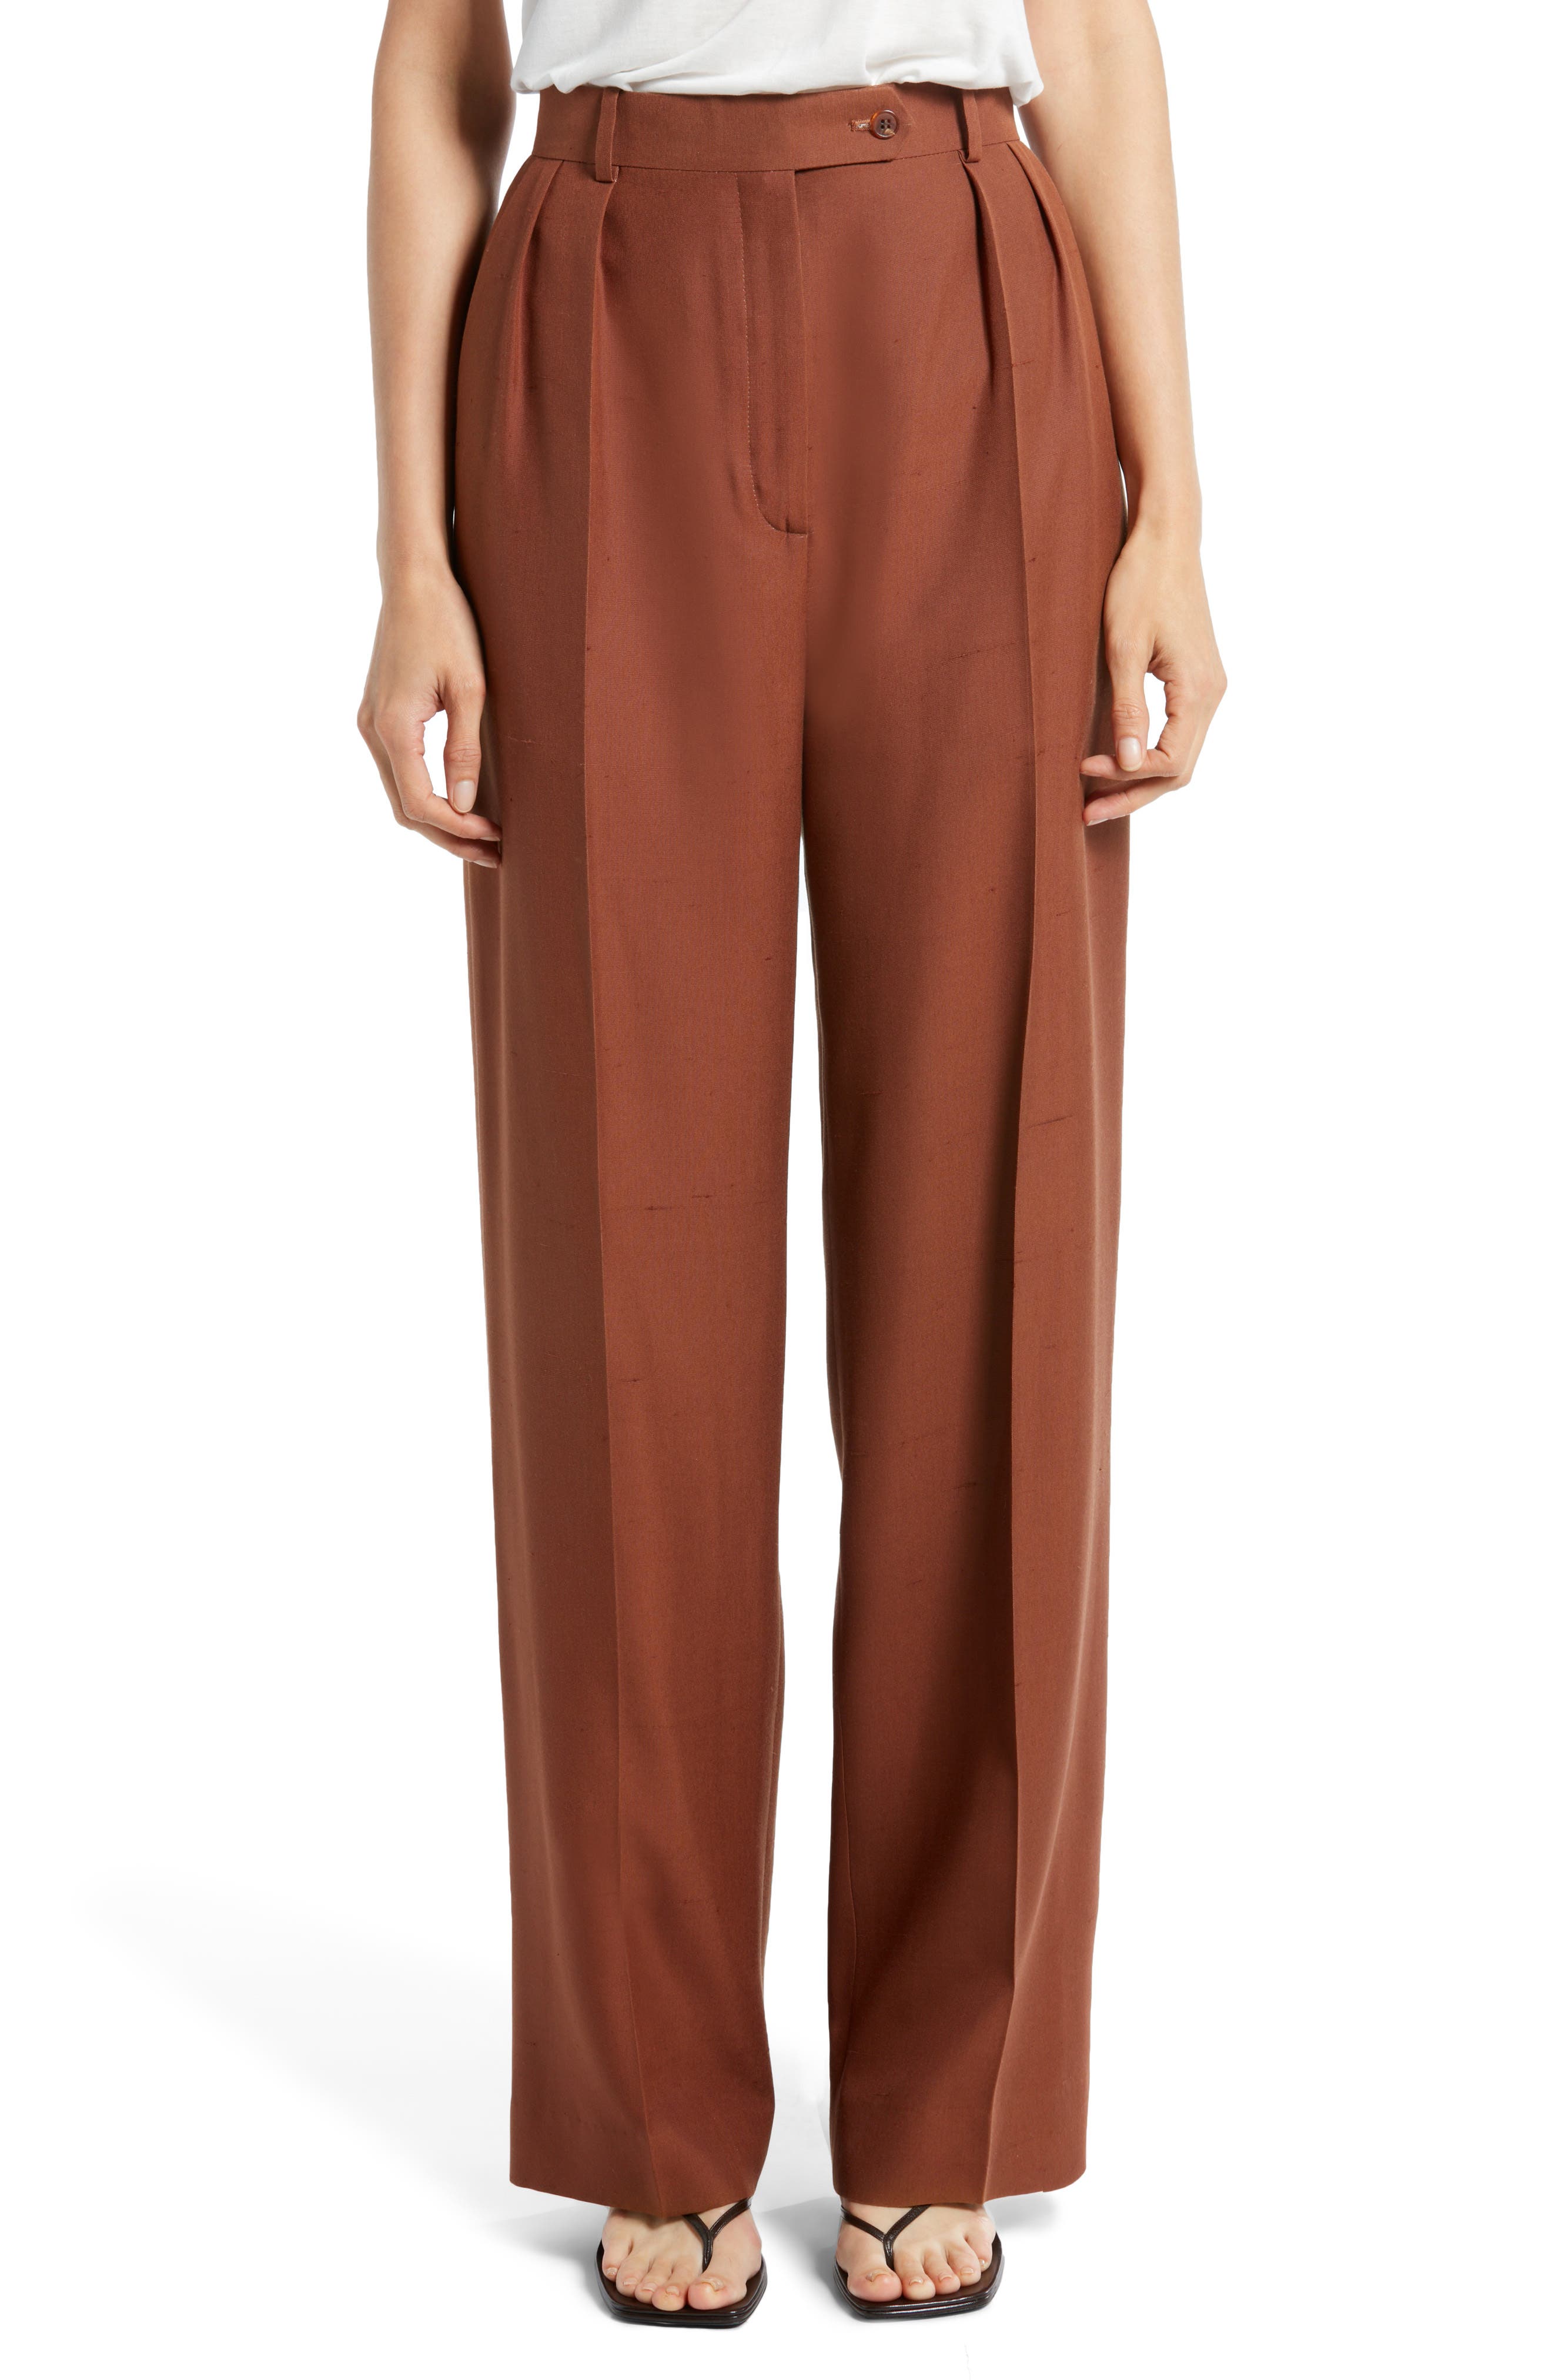 The Row Nino Straight Leg Silk Shantung Pants in Toffee at Nordstrom, Size 12